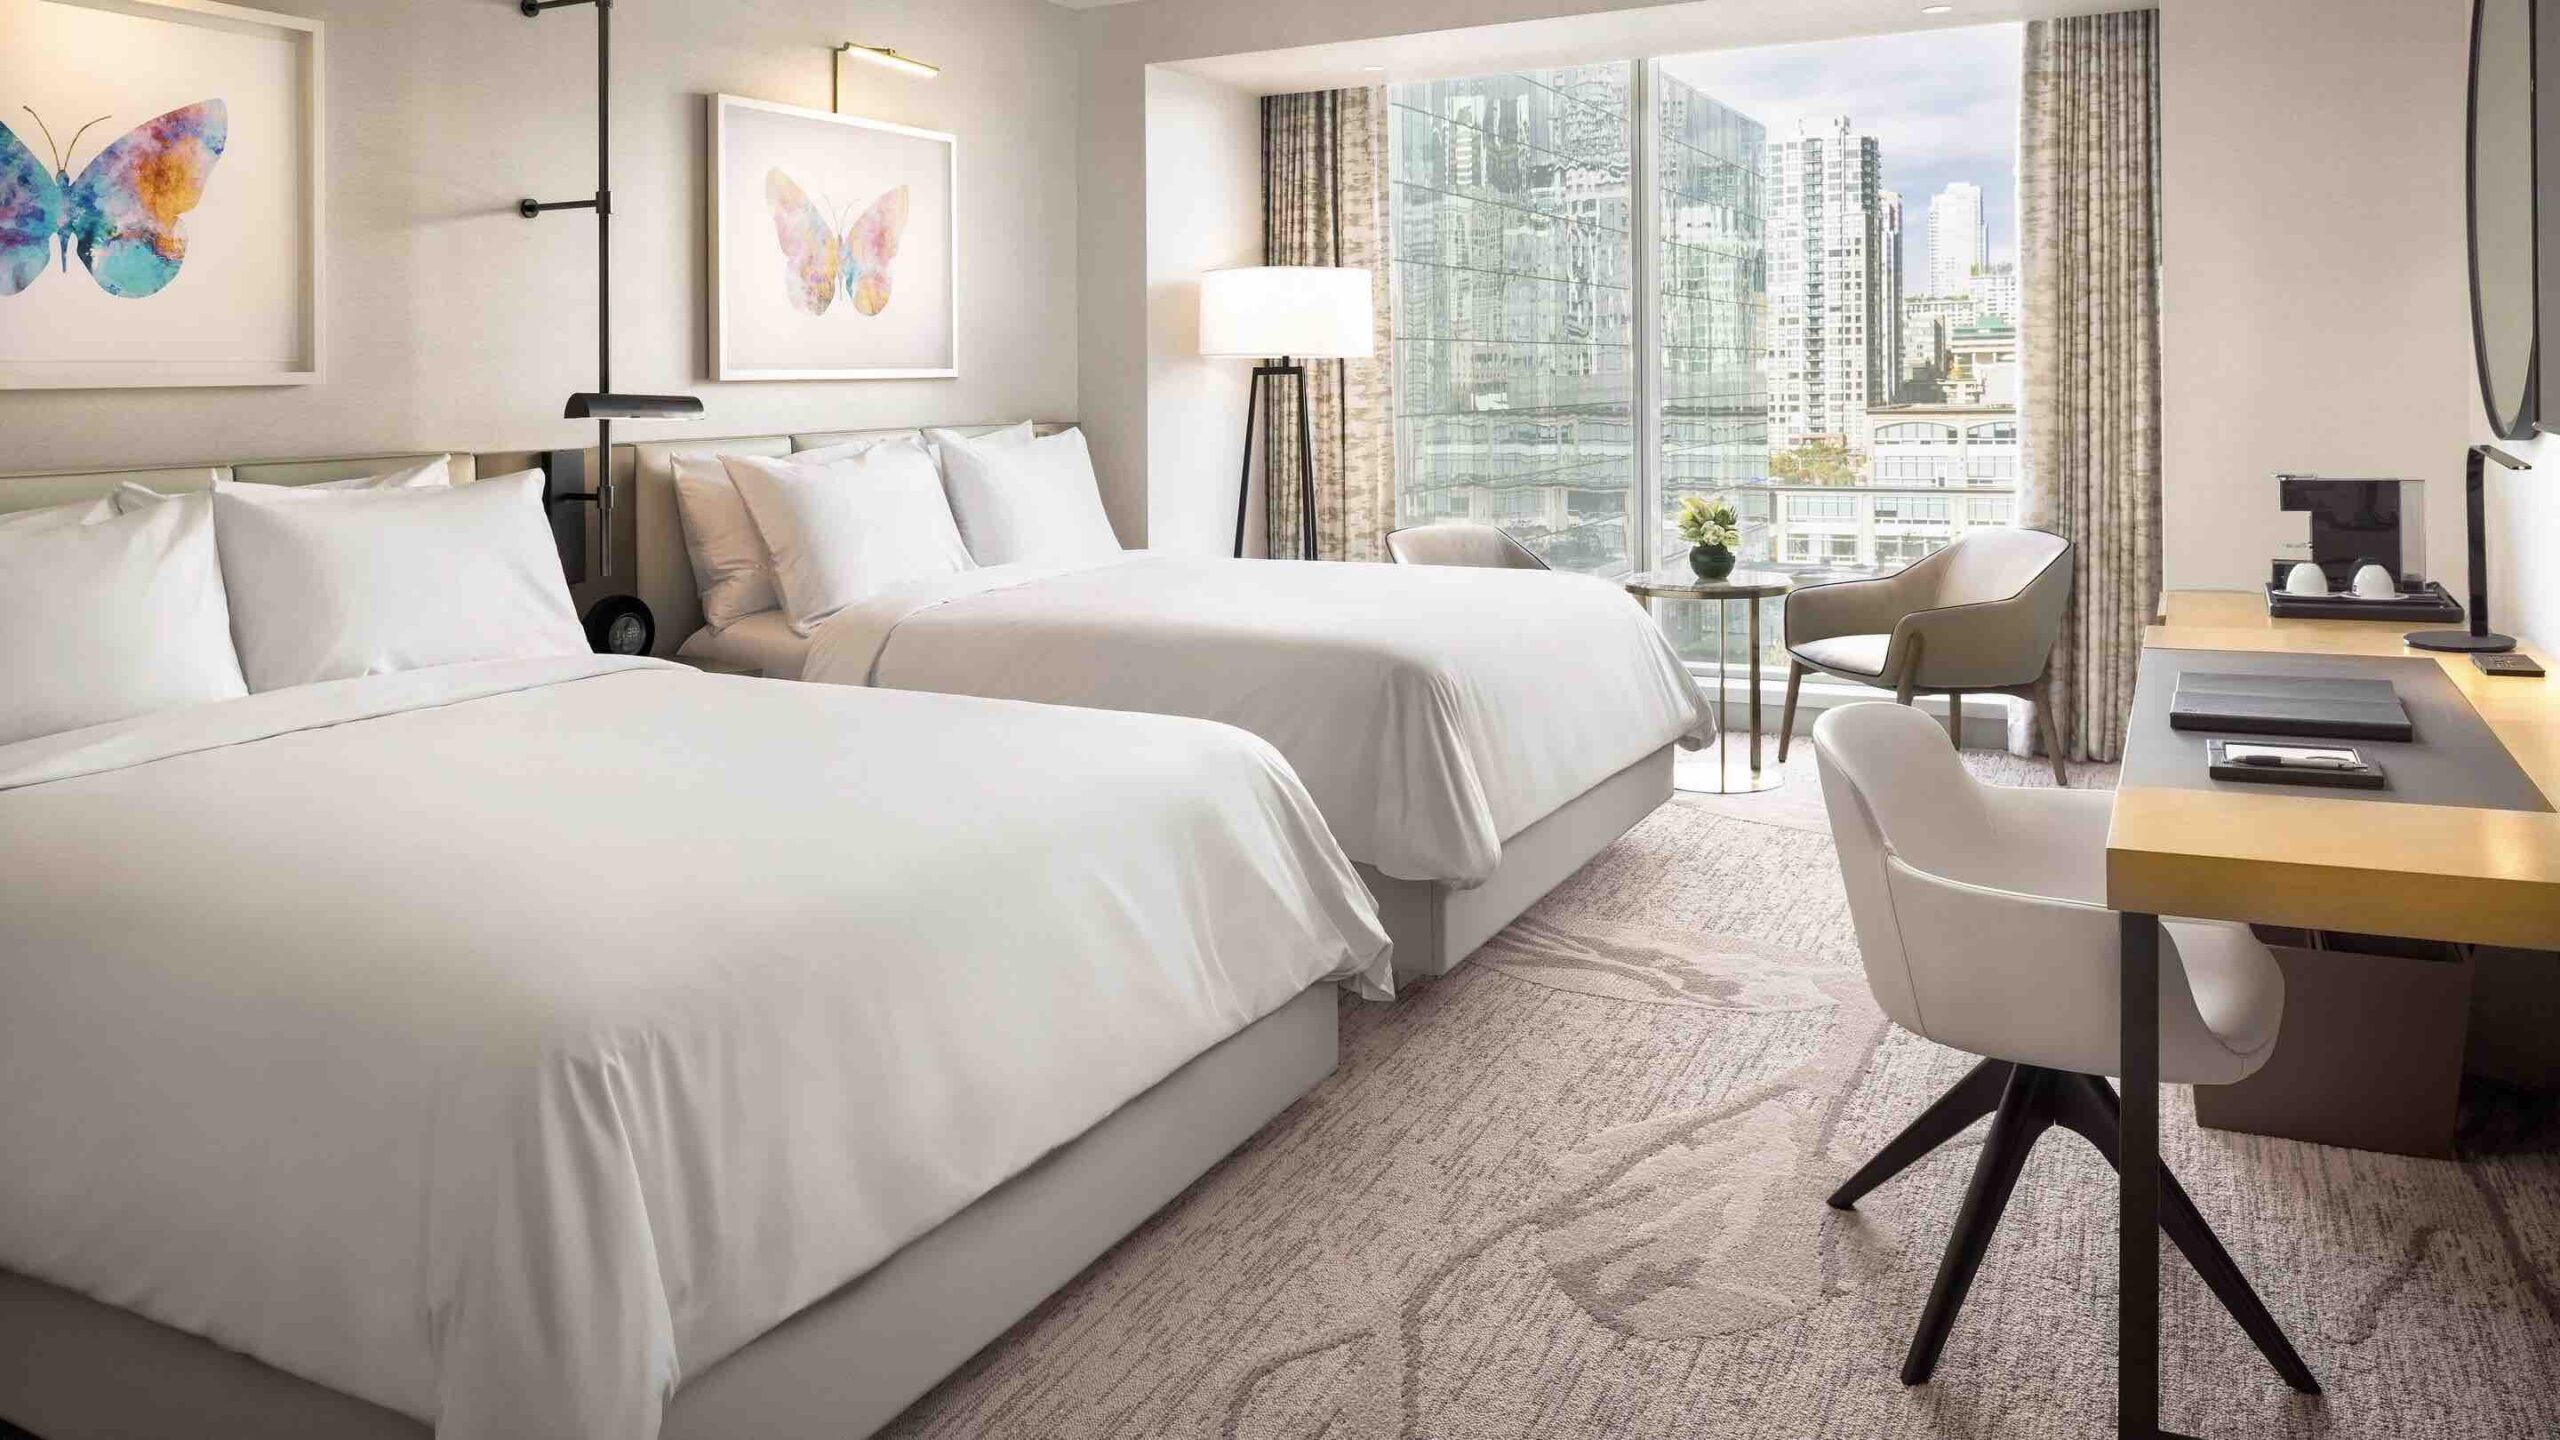 Luxury hotels in Vancouver include JW Marriott Parq Vancouver with its chic bedrooms